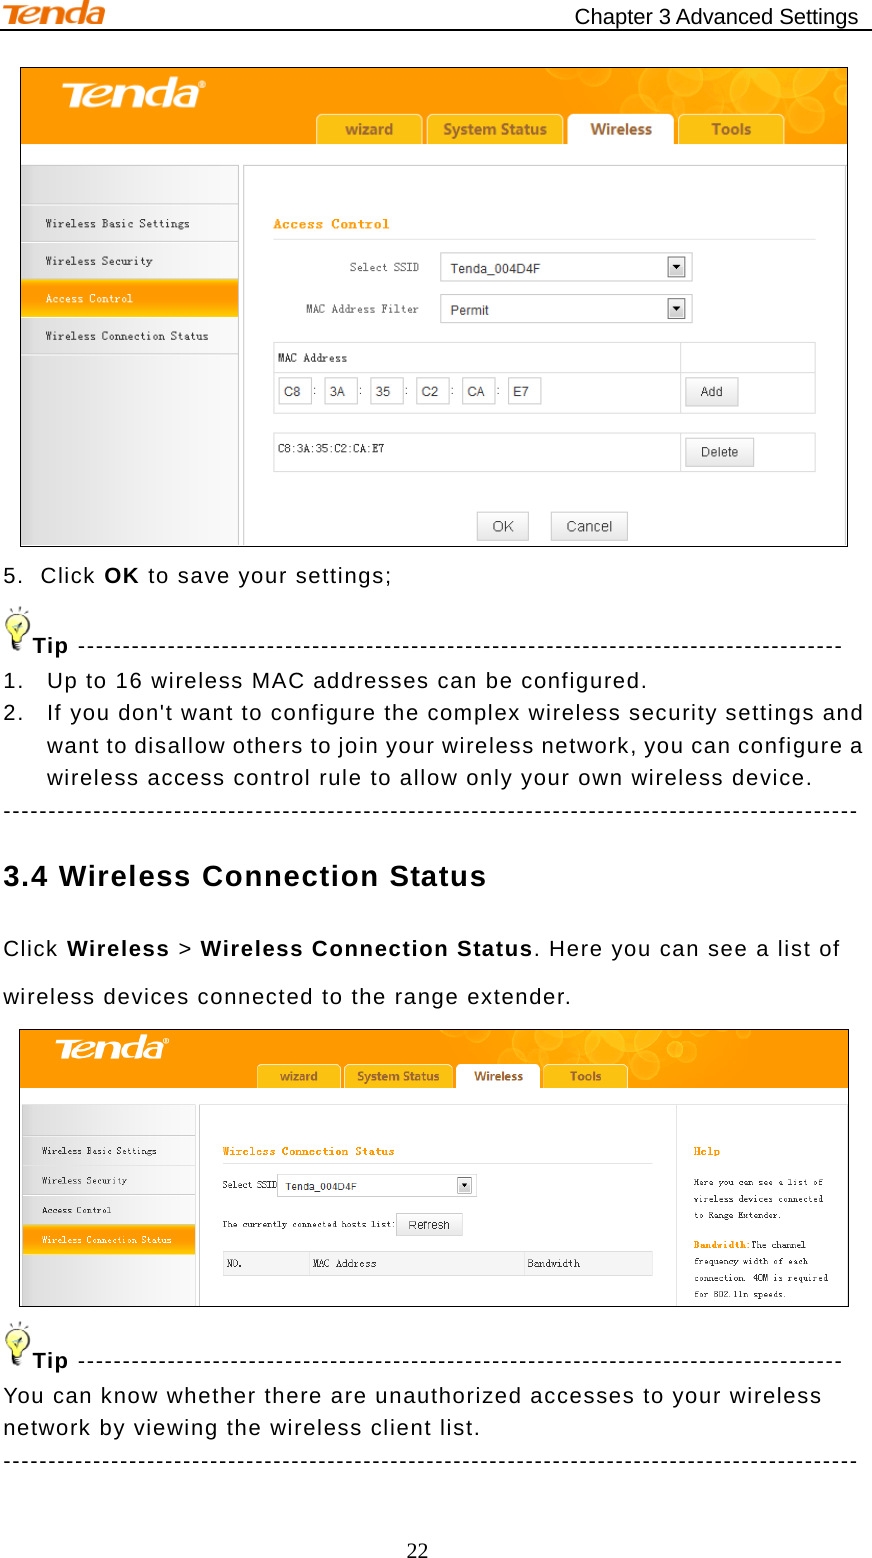                                            Chapter 3 Advanced Settings 22  5. Click OK to save your settings; Tip ------------------------------------------------------------------------------------- 1. Up to 16 wireless MAC addresses can be configured. 2. If you don&apos;t want to configure the complex wireless security settings and want to disallow others to join your wireless network, you can configure a wireless access control rule to allow only your own wireless device. ----------------------------------------------------------------------------------------------- 3.4 Wireless Connection Status Click Wireless &gt; Wireless Connection Status. Here you can see a list of wireless devices connected to the range extender.  Tip ------------------------------------------------------------------------------------- You can know whether there are unauthorized accesses to your wireless network by viewing the wireless client list. ----------------------------------------------------------------------------------------------- 